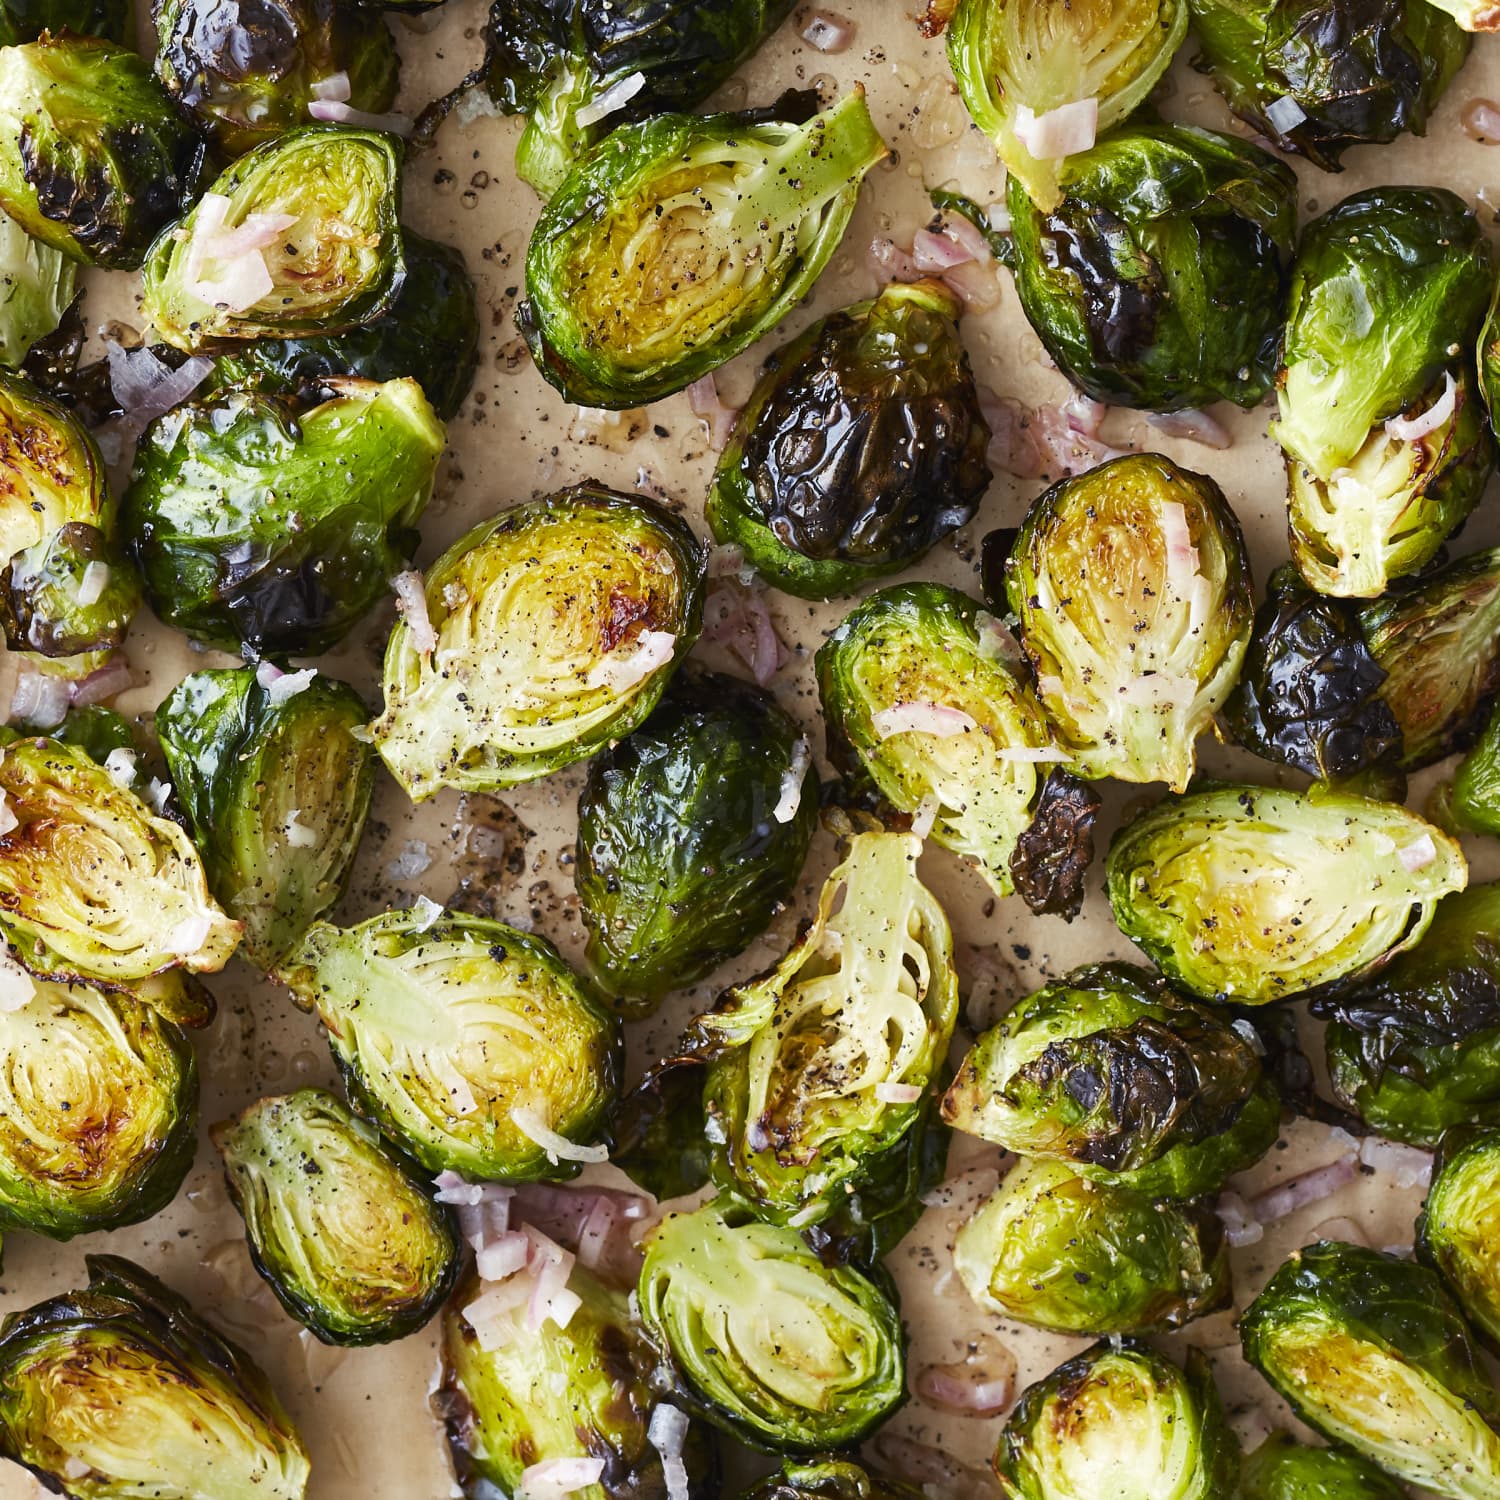 https://cdn.apartmenttherapy.info/image/upload/f_jpg,q_auto:eco,c_fill,g_auto,w_1500,ar_1:1/k%2FPhoto%2FRecipes%2F2020-03-Air-Fryer-Brussels-Sprouts%2F2020_everydayfood_airfryer_brusselssprouts2_096